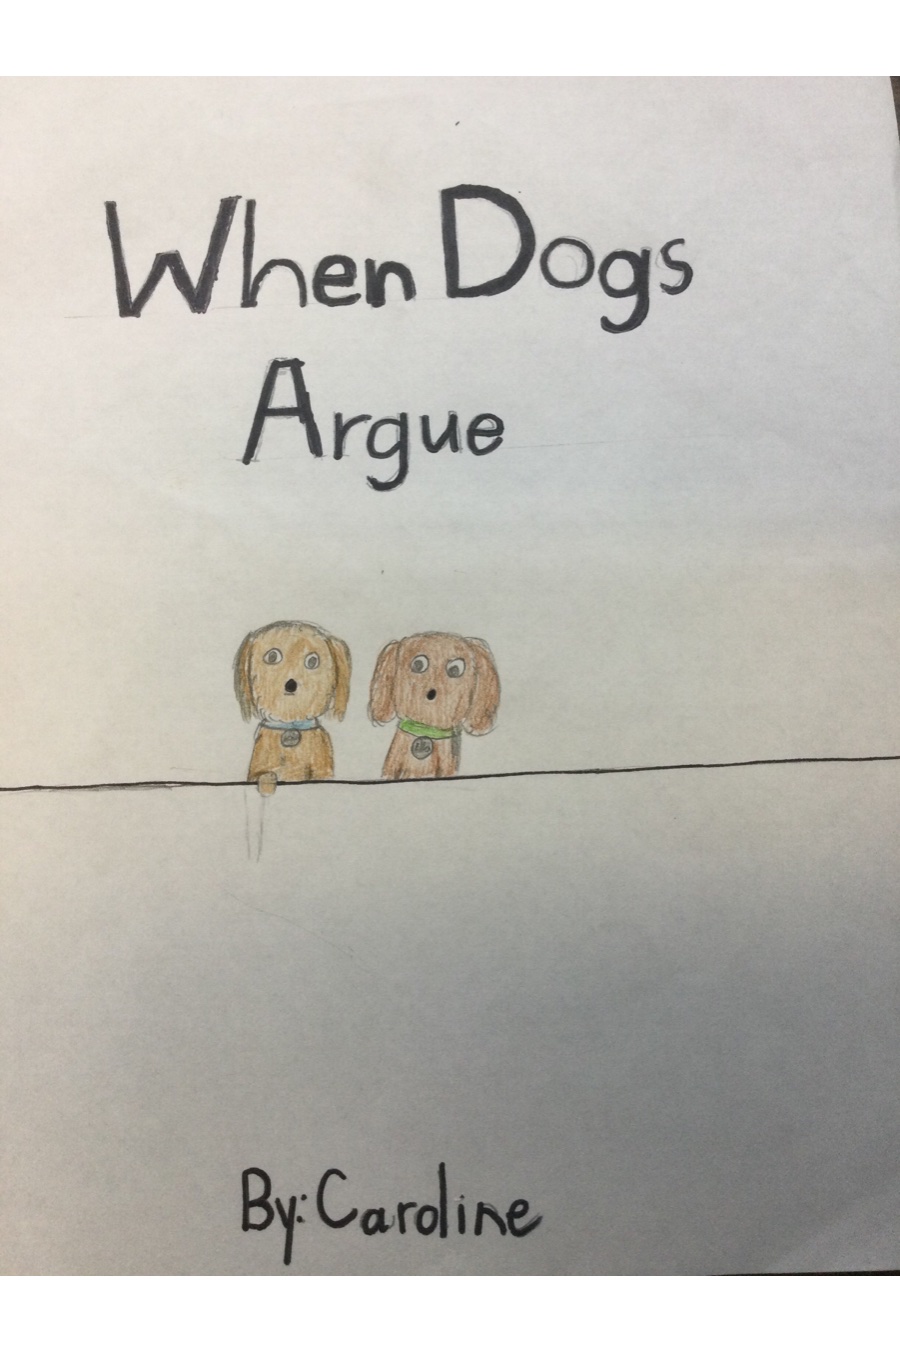 Dogs When They Argue by Caroline L